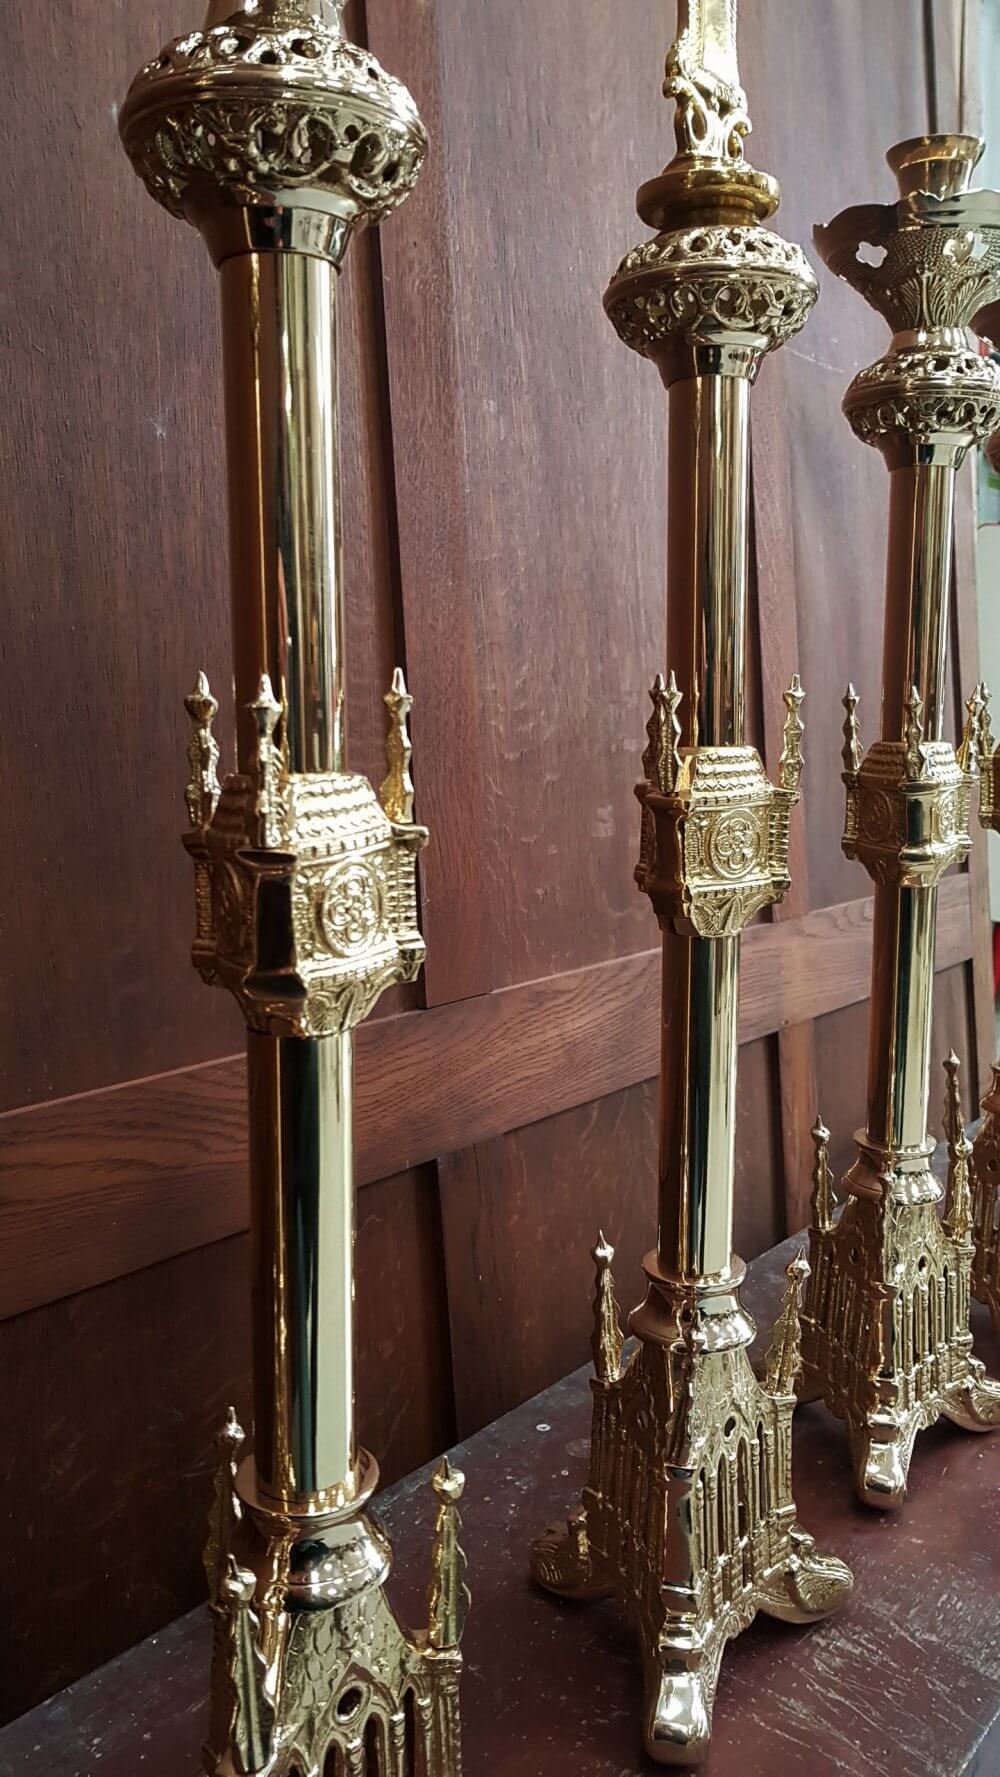 Set of 6 - Sanctuary Candle Stands - Brass - Handmade Sanctuary